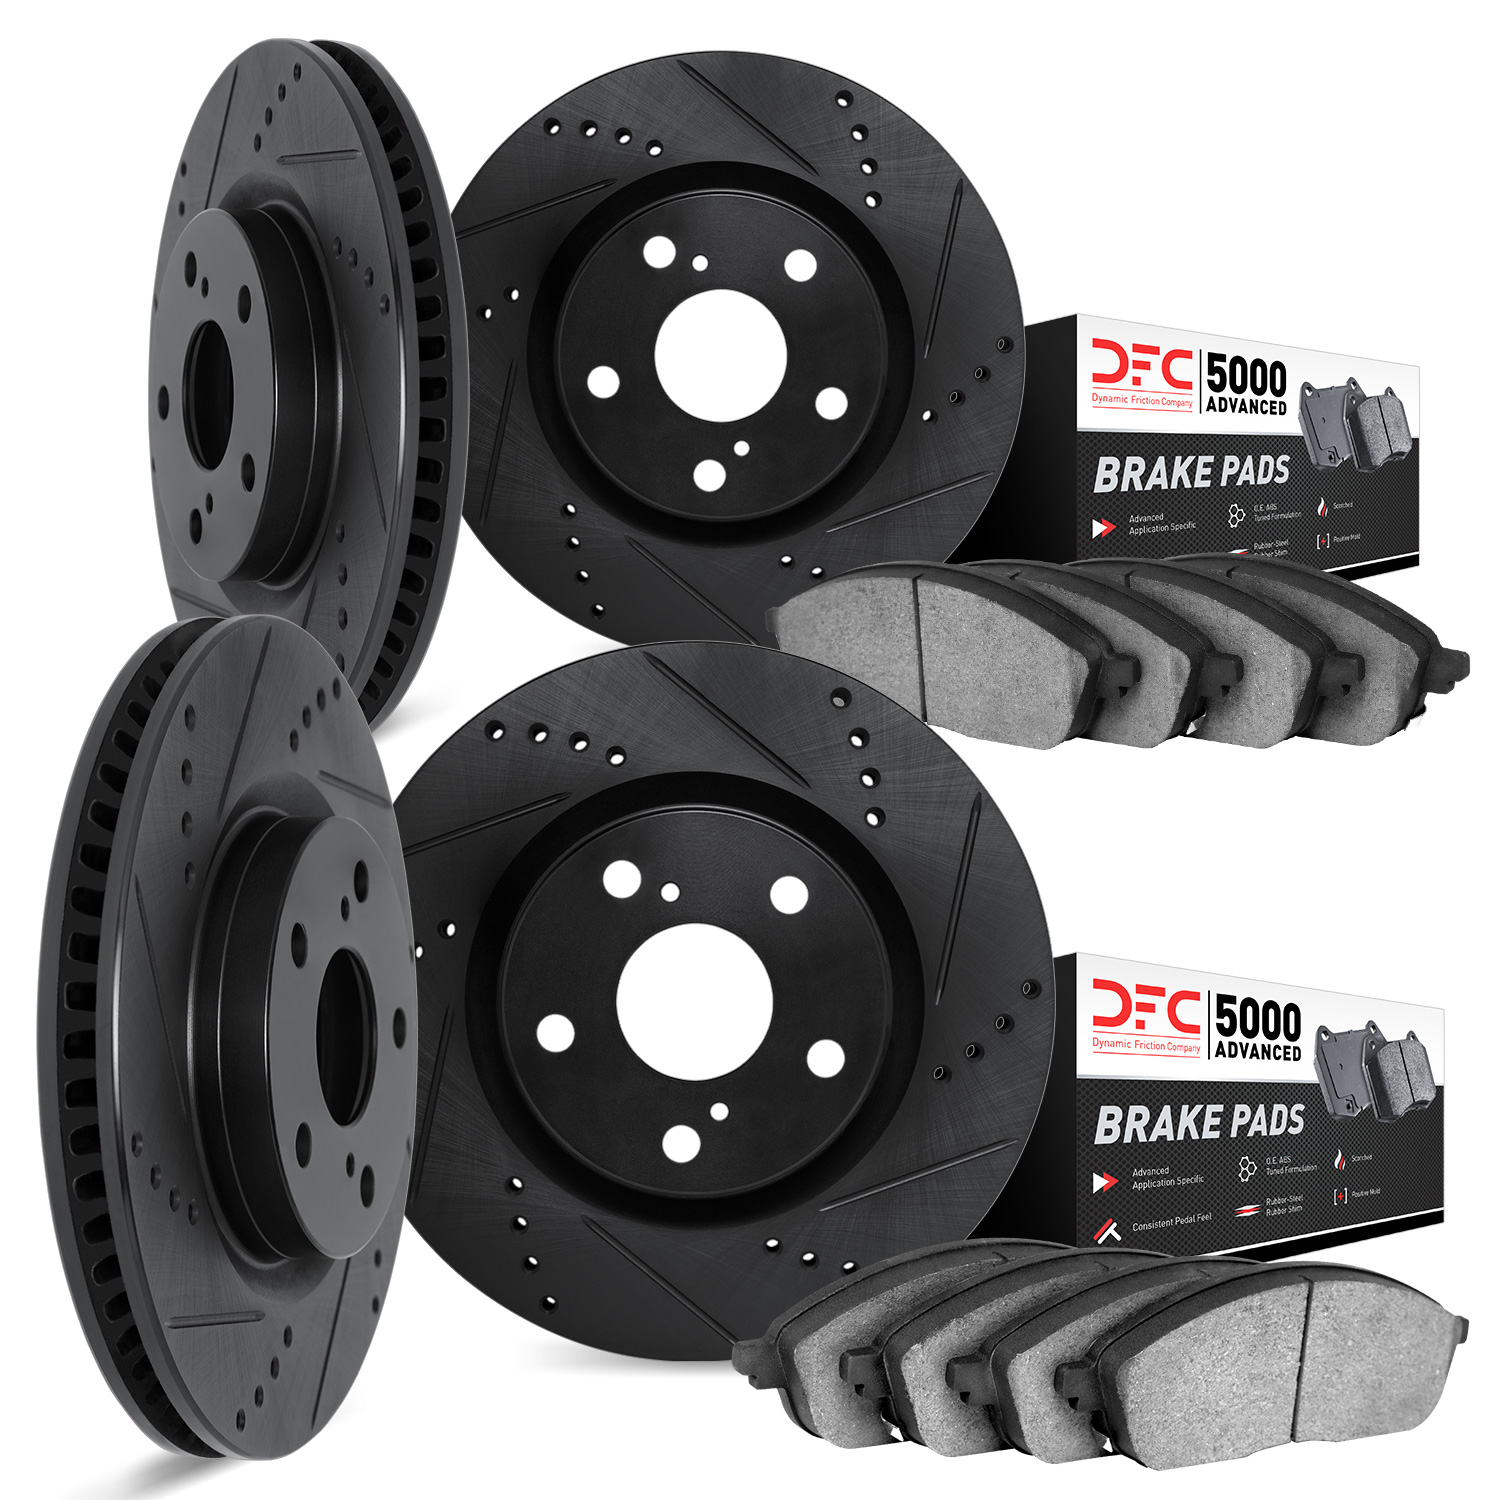 8504-54404 Drilled/Slotted Brake Rotors w/5000 Advanced Brake Pads Kit [Black], Fits Select Ford/Lincoln/Mercury/Mazda, Position